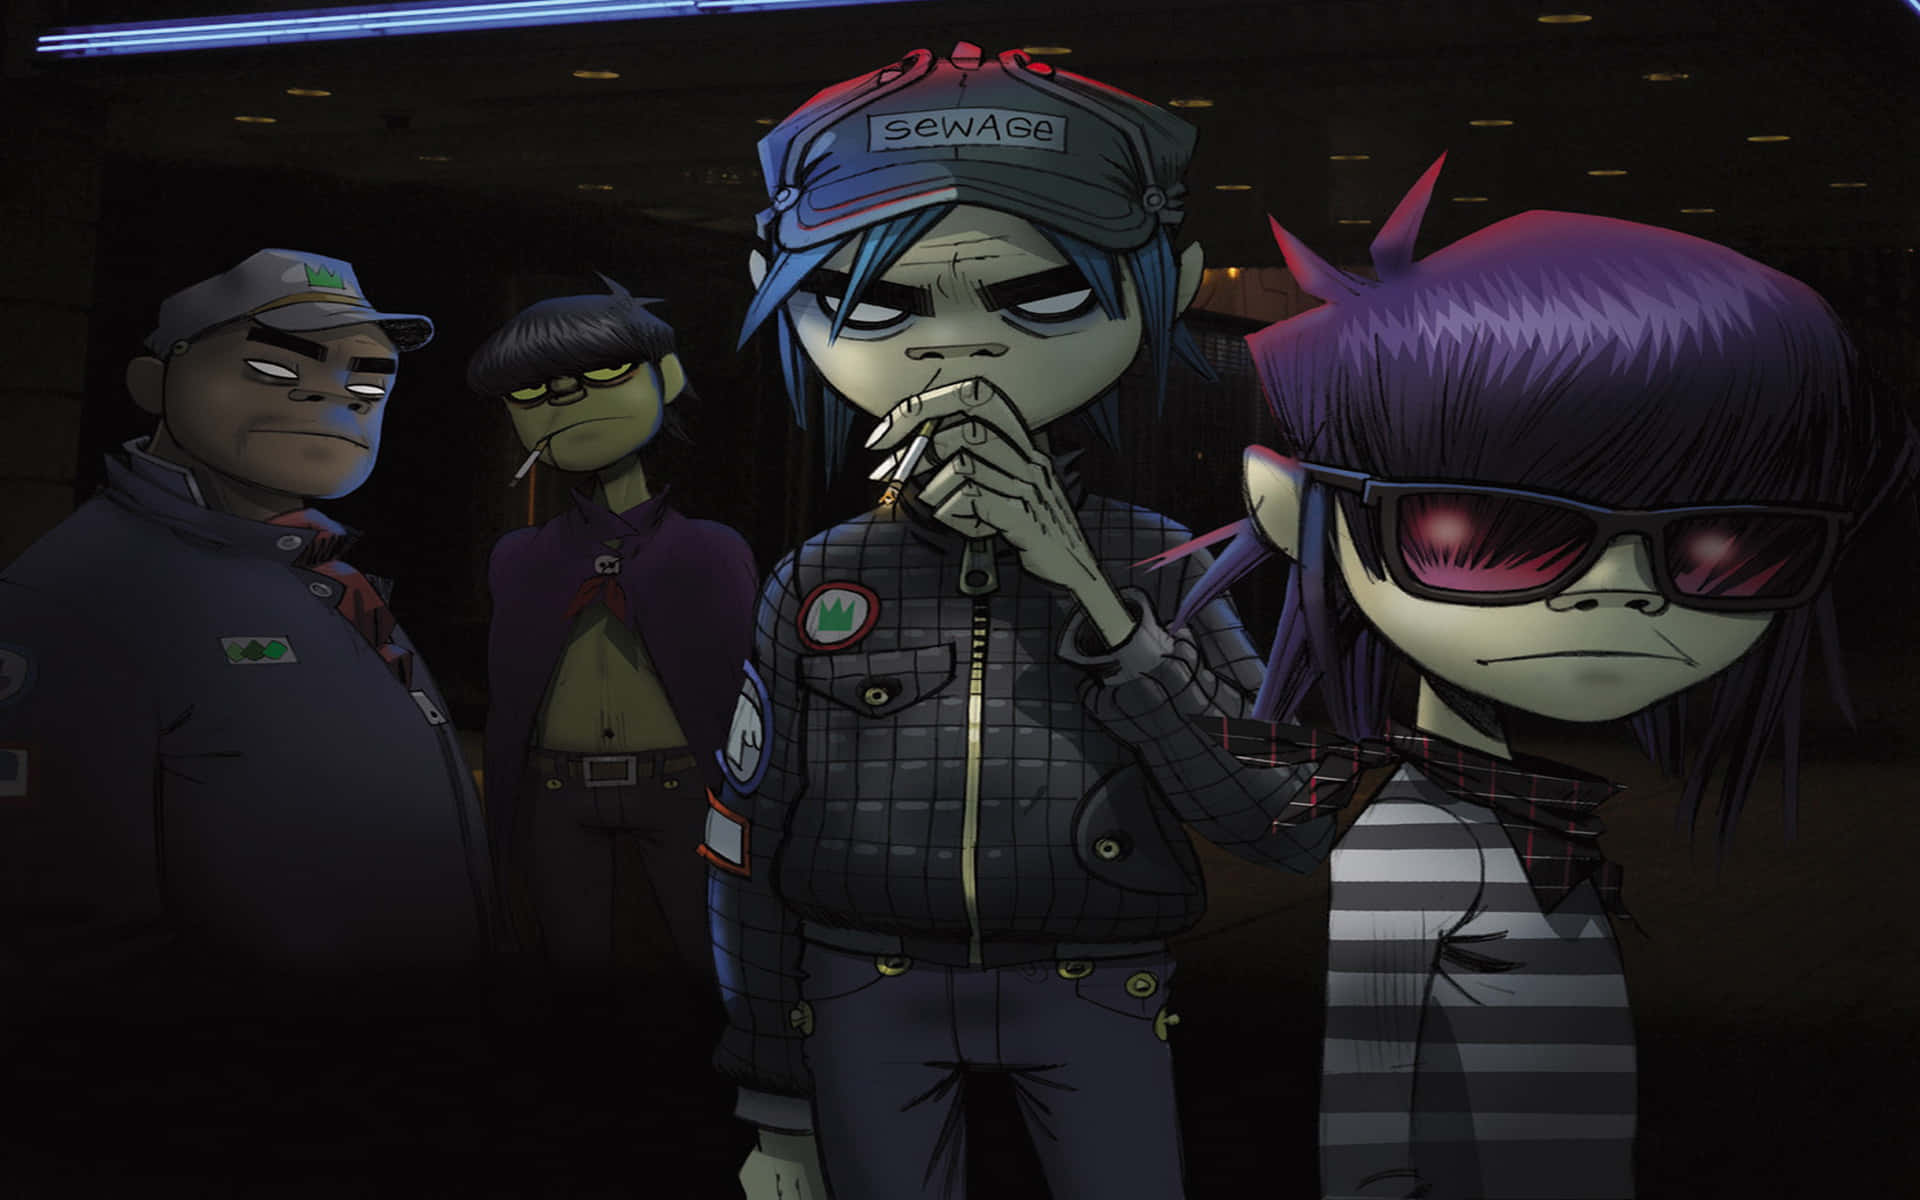 Gorillaz, the unique and creative virtual band, at their best!